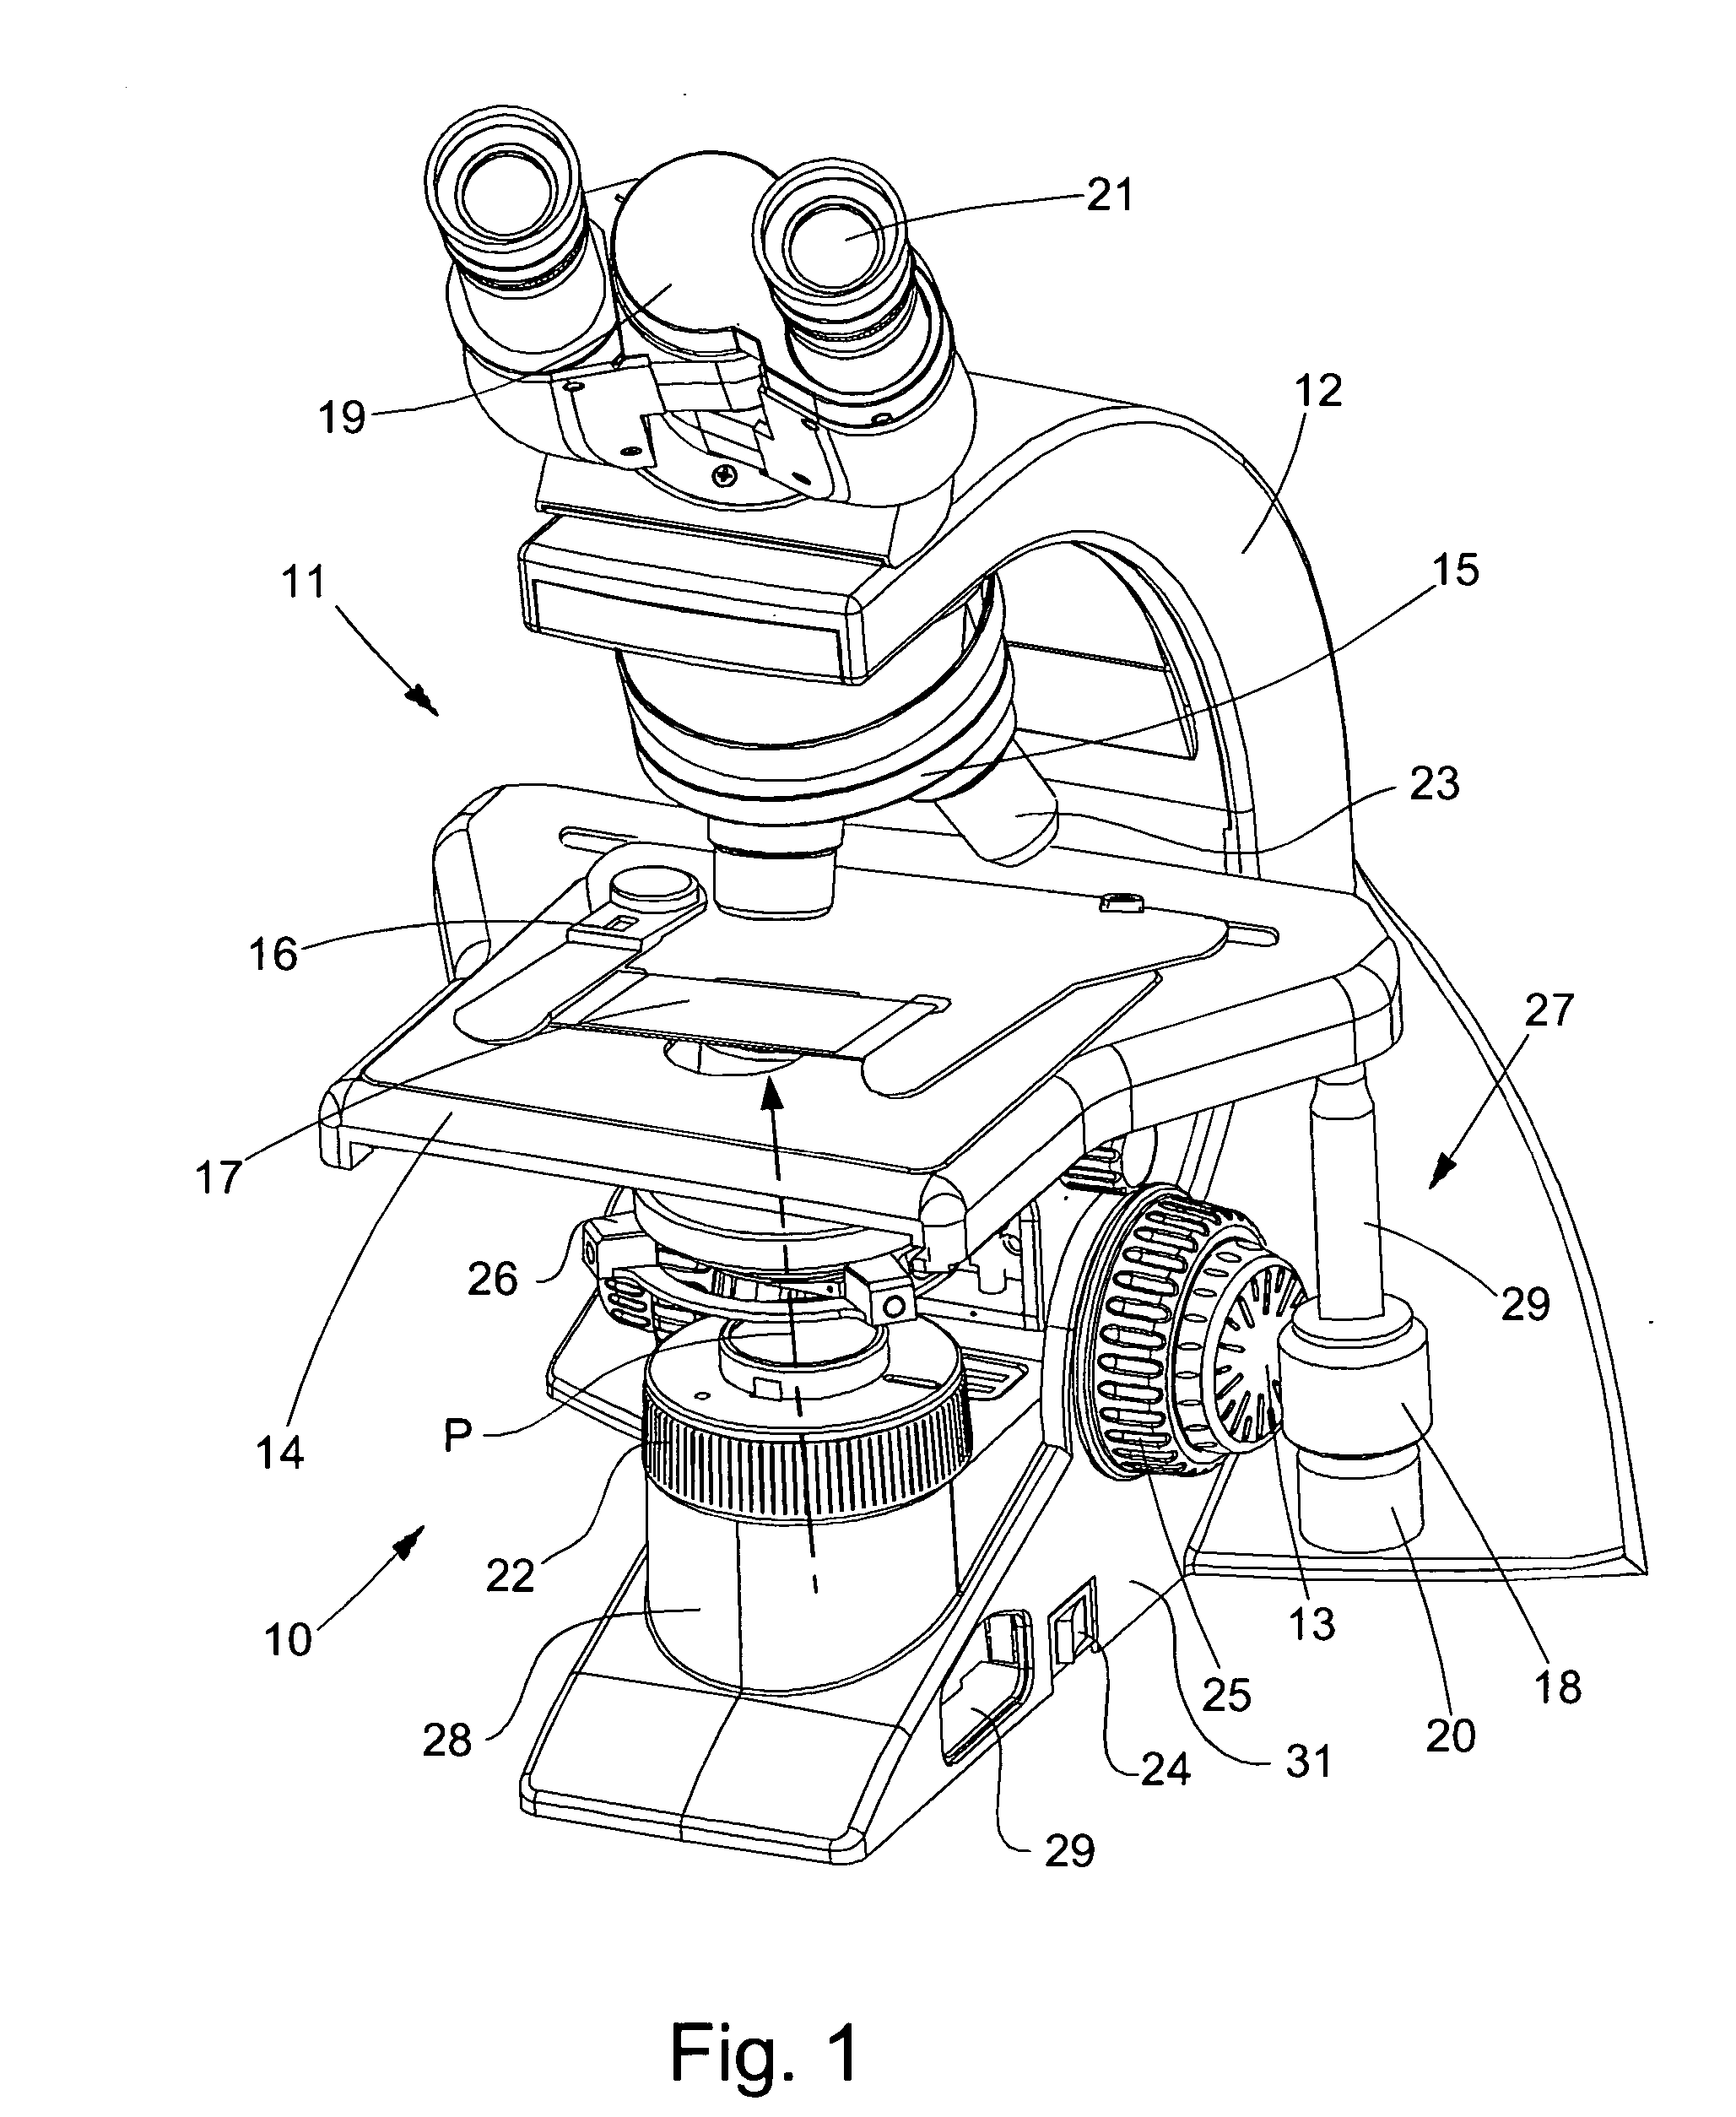 Lamp assembly for a microscope